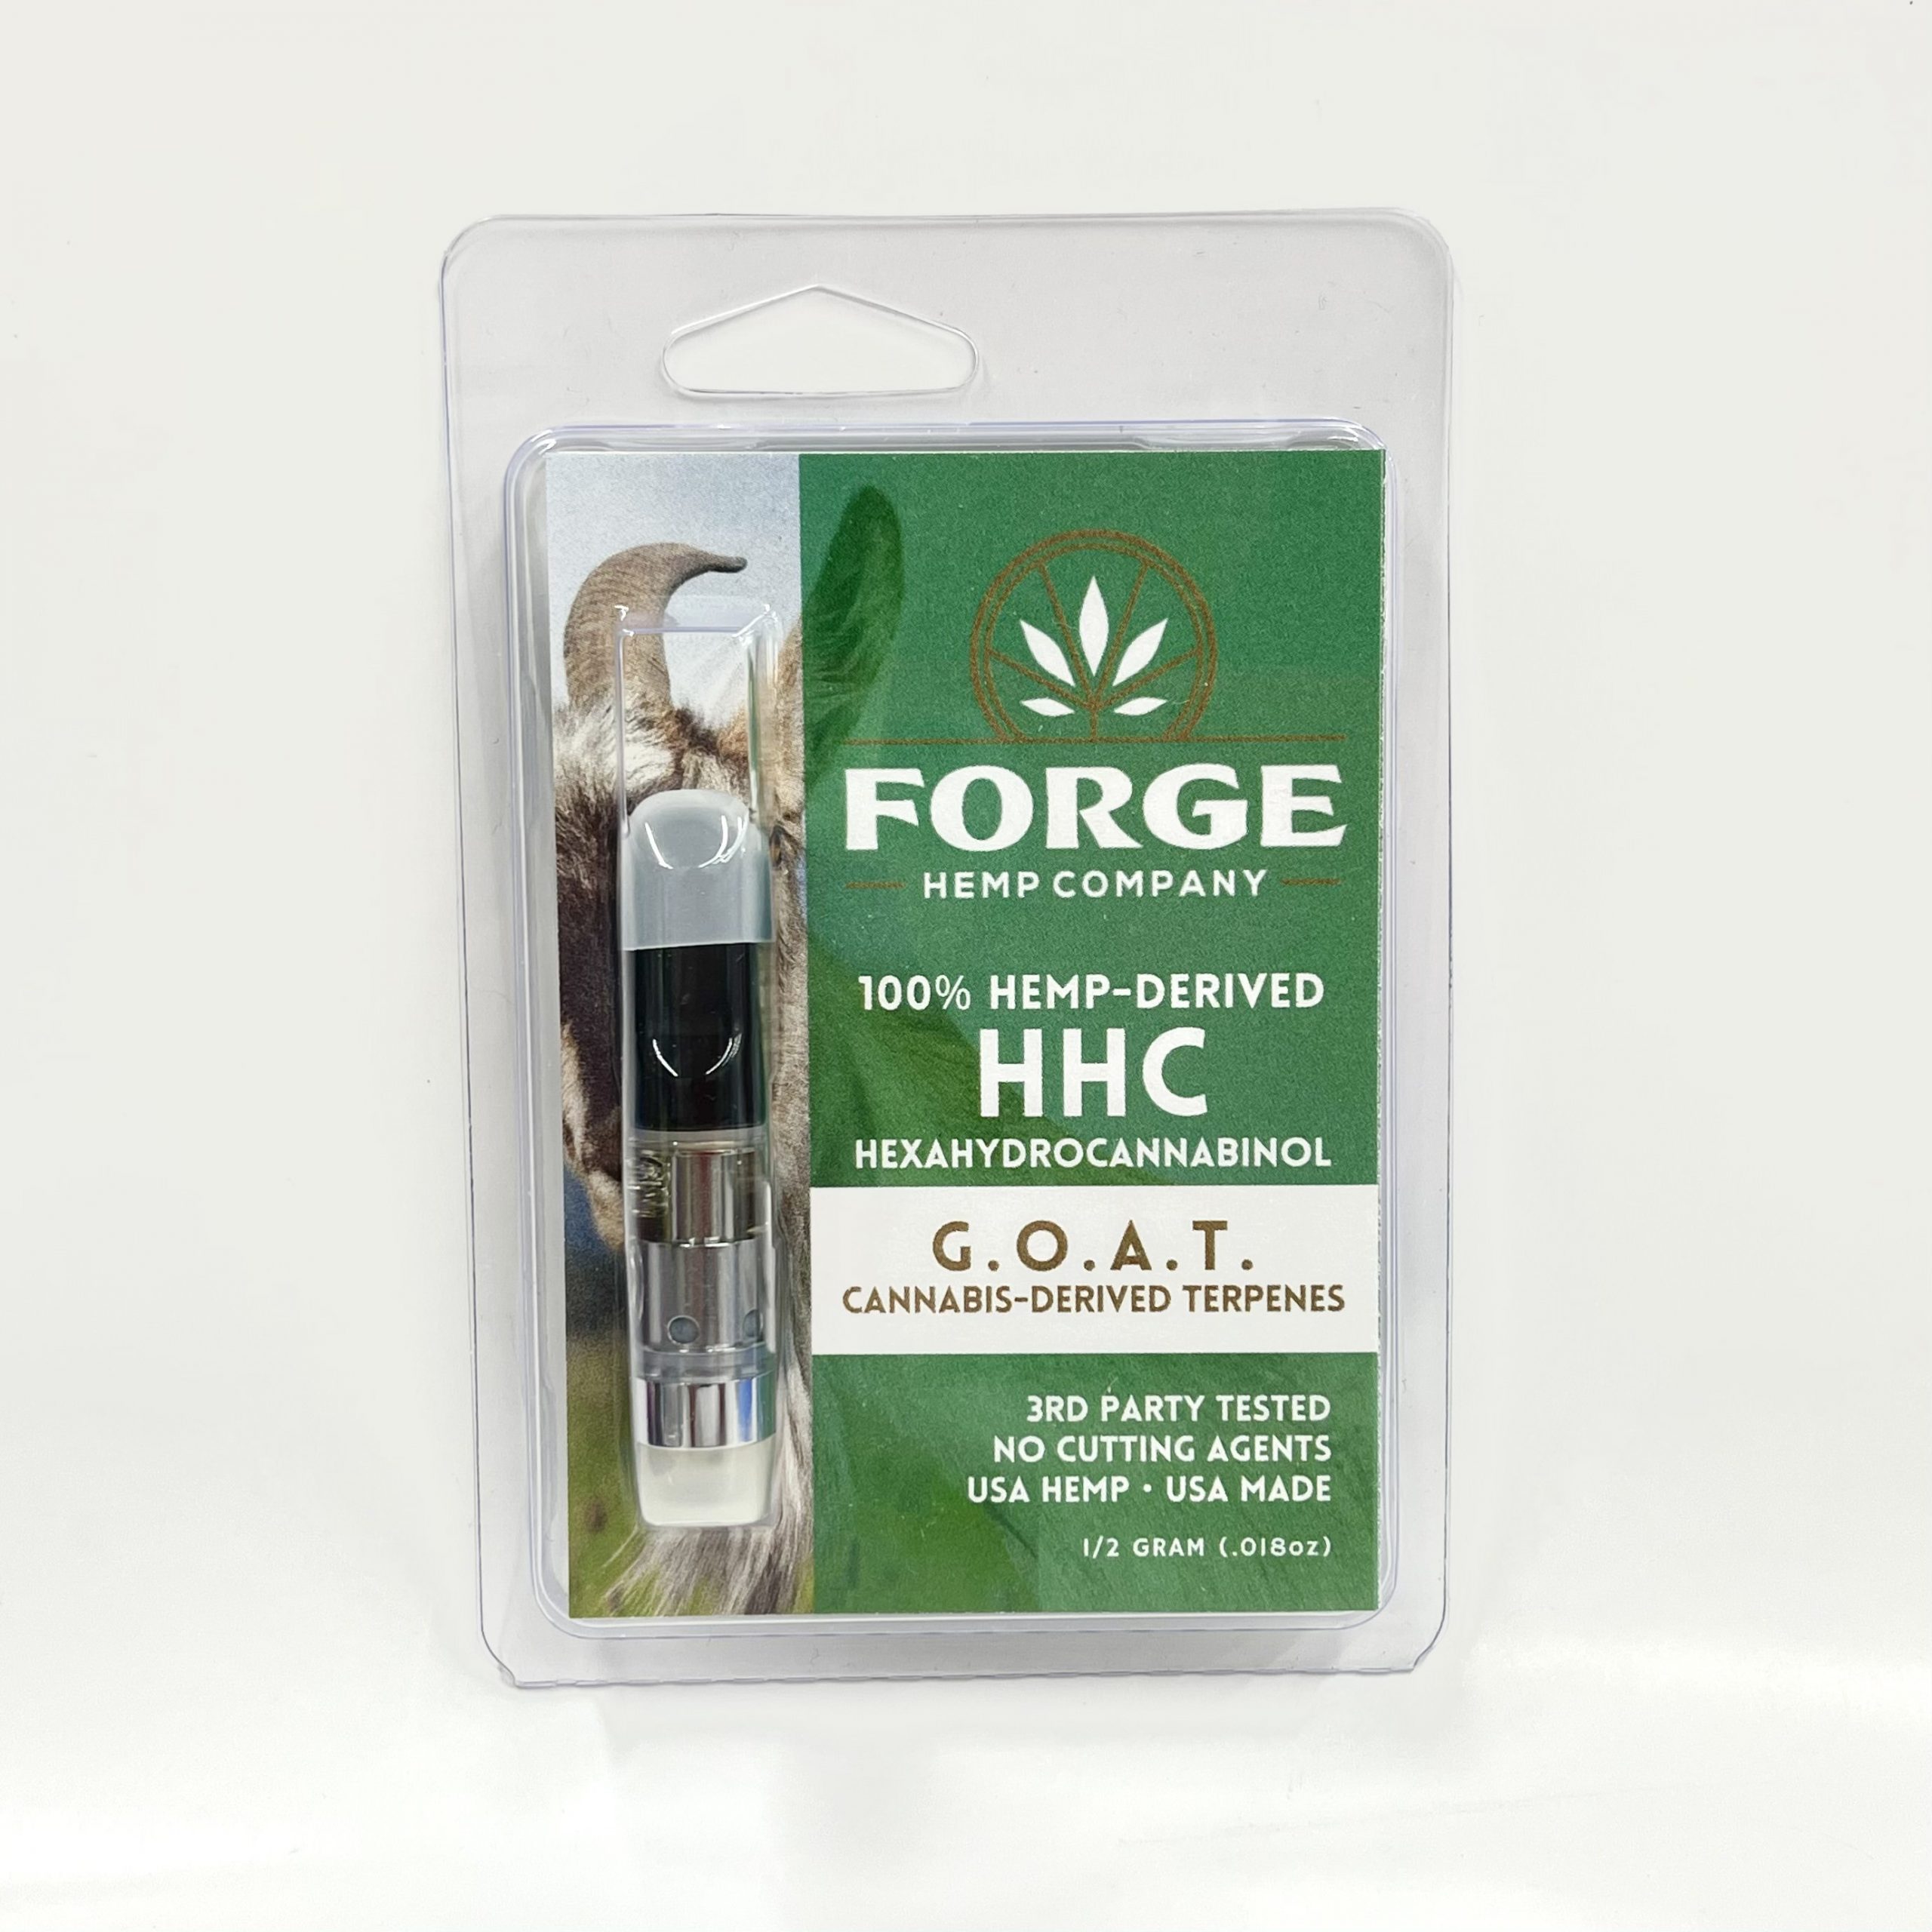 HHC with G.O.A.T. terpenes